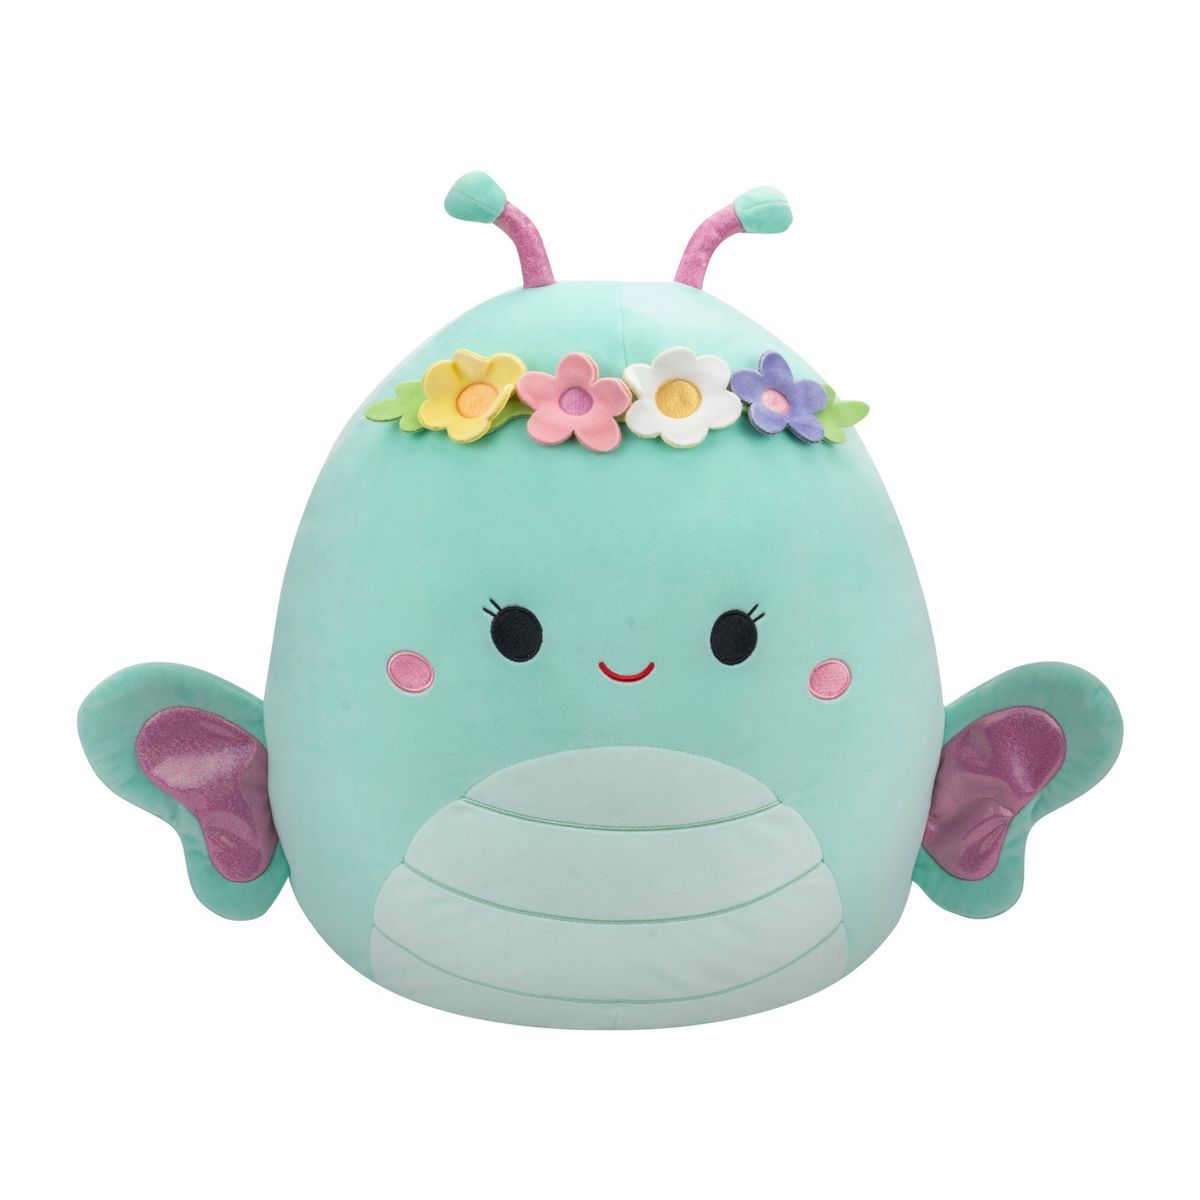 Squishmallows 16" Reina Seafoam Green Butterfly with Flower Crown Large Plush | Target